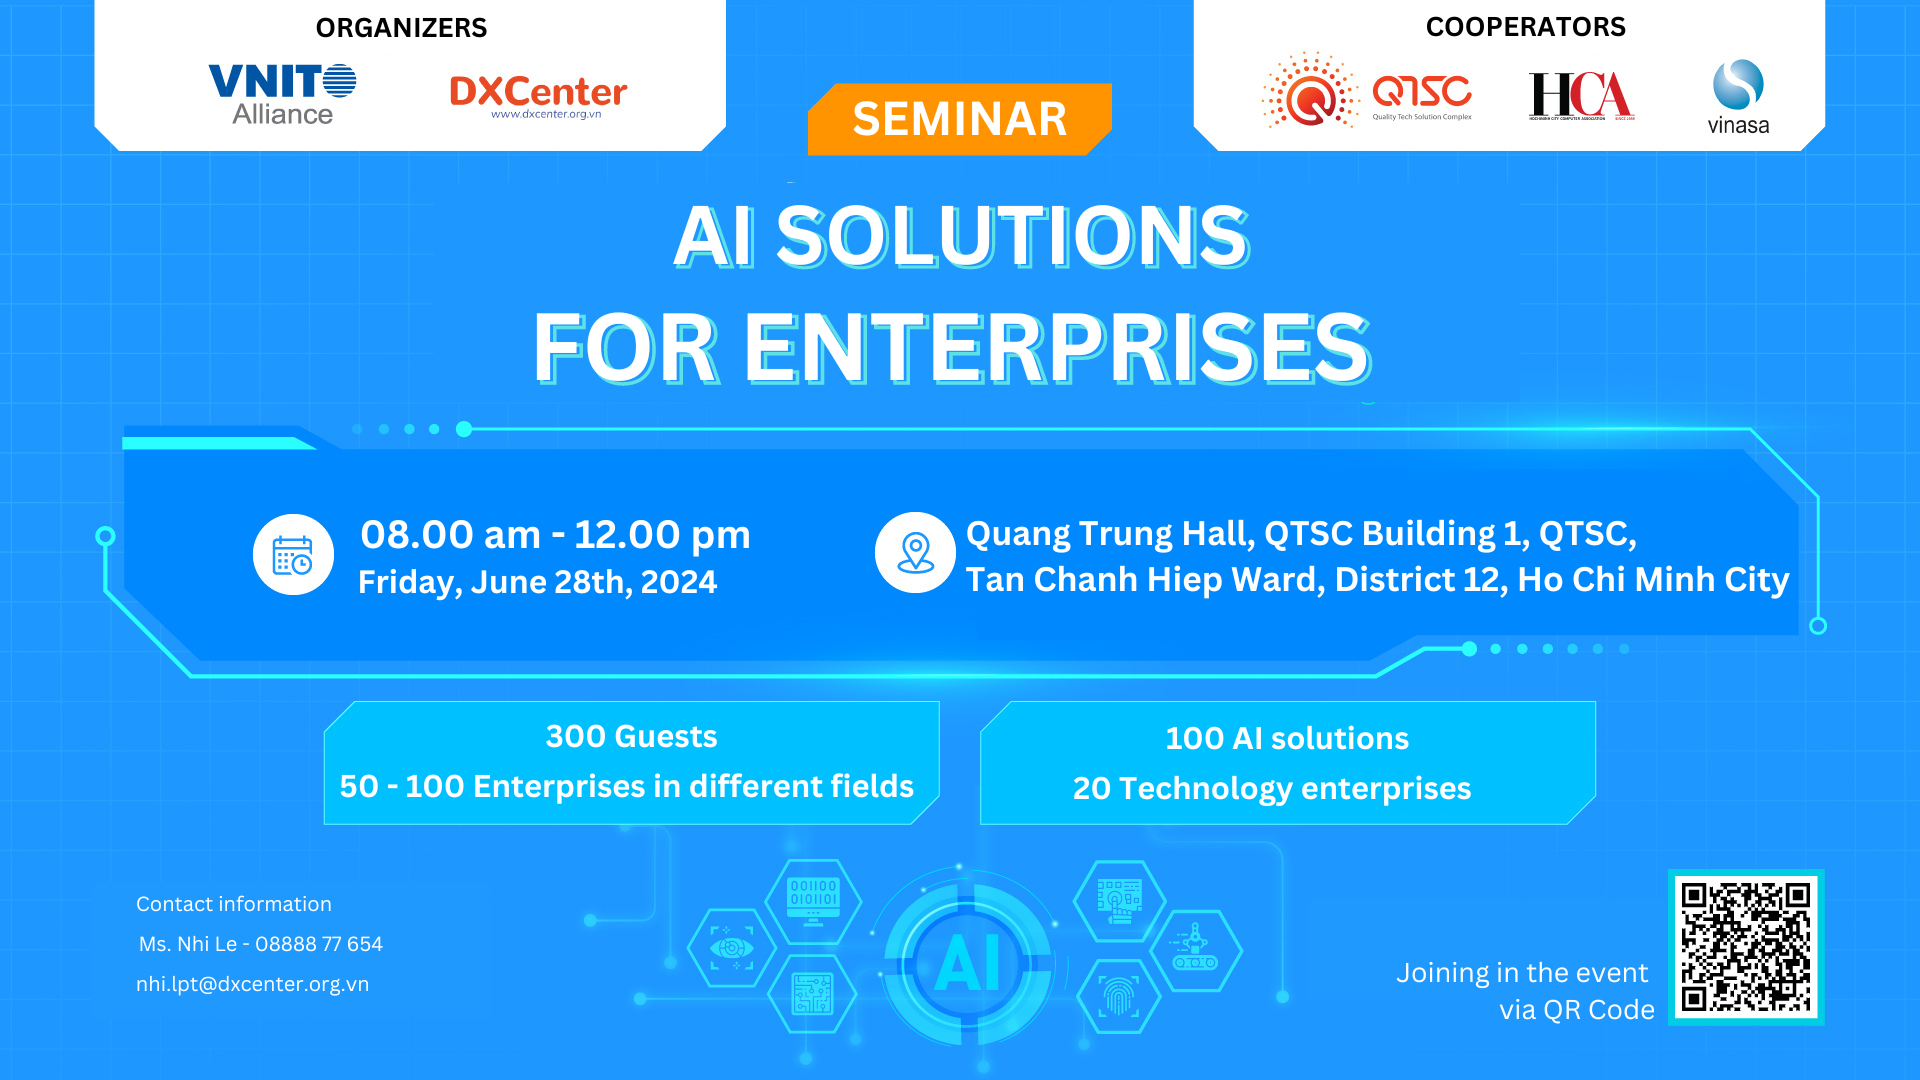 Inviting to attend the Seminar - Exhibition: “AI solutions for Enterprises”